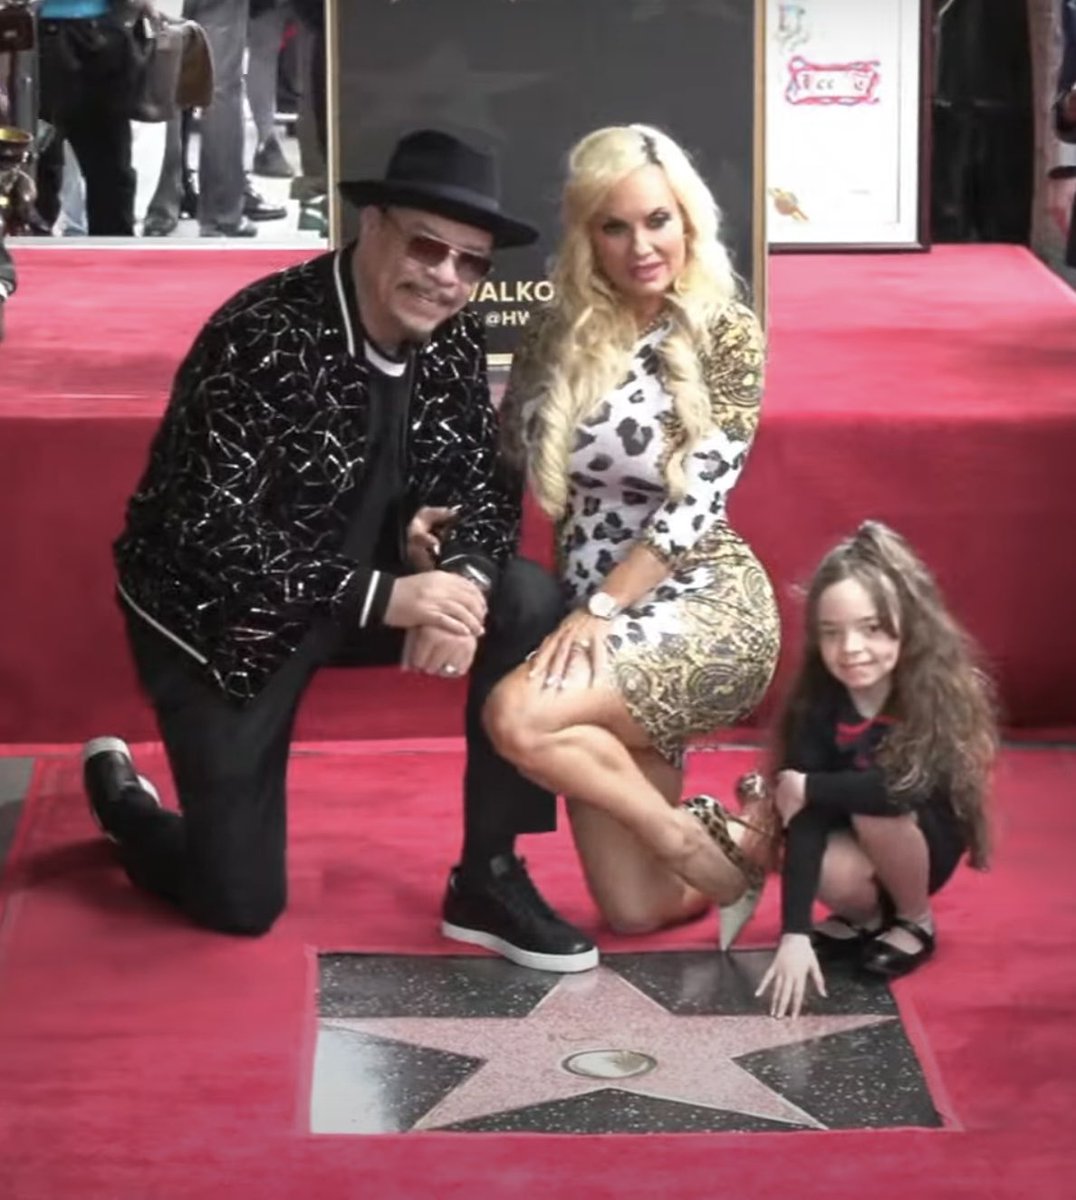 Congratulations to my brother @FINALLEVEL & @cocosworld #Hollywood #WalkOfFame #IceTea #IcedTeaDay #Friday #Celebrity #coco #RedCarpet #Chanel